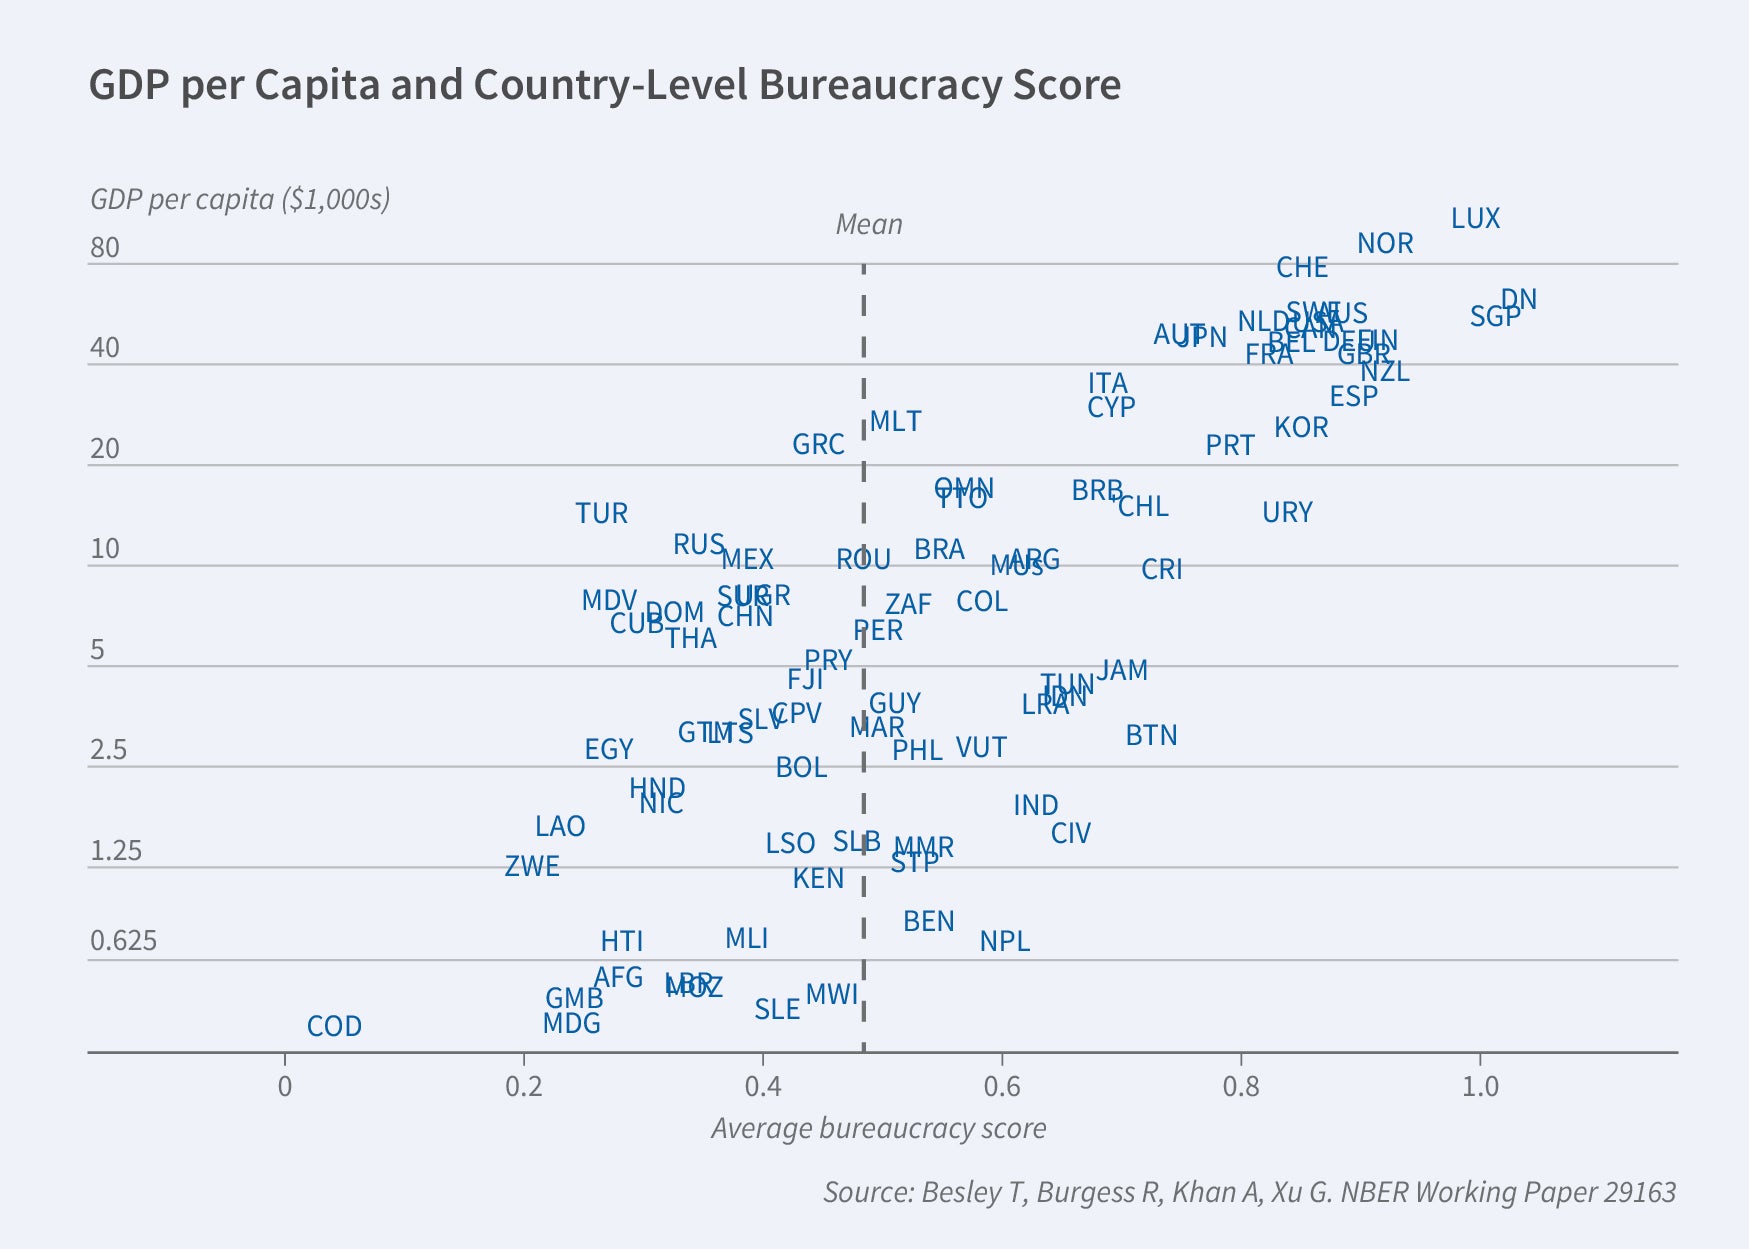 Program Report Figure 2: This is a scatter plot titled GDP per Capita dn country-Level Bureaucracy Score. The points of the scatter plot are abbreviations of countries instead of dots.  The y-axis is labeled GDP per capita ($1,000s) and ranges from 0 to 80.  The x-axis is labeled average bureaucracy score and ranges from 0 to 1.  A vertical dotted line depicting the mean, about 0.5, is placed in the middle of the scatter plot. The distribution of the points creates an upward trajectory from the bottom left corner to the upper right corner. The majority of the data points are concentrated within a rectangular space from 0 to 40 on the y-axis and 0.2 to 0.8 on the x-axis.  The source line reads Source: Besley T, Burgess R, Khan A, Xu G. NBER Working Paper 29163.